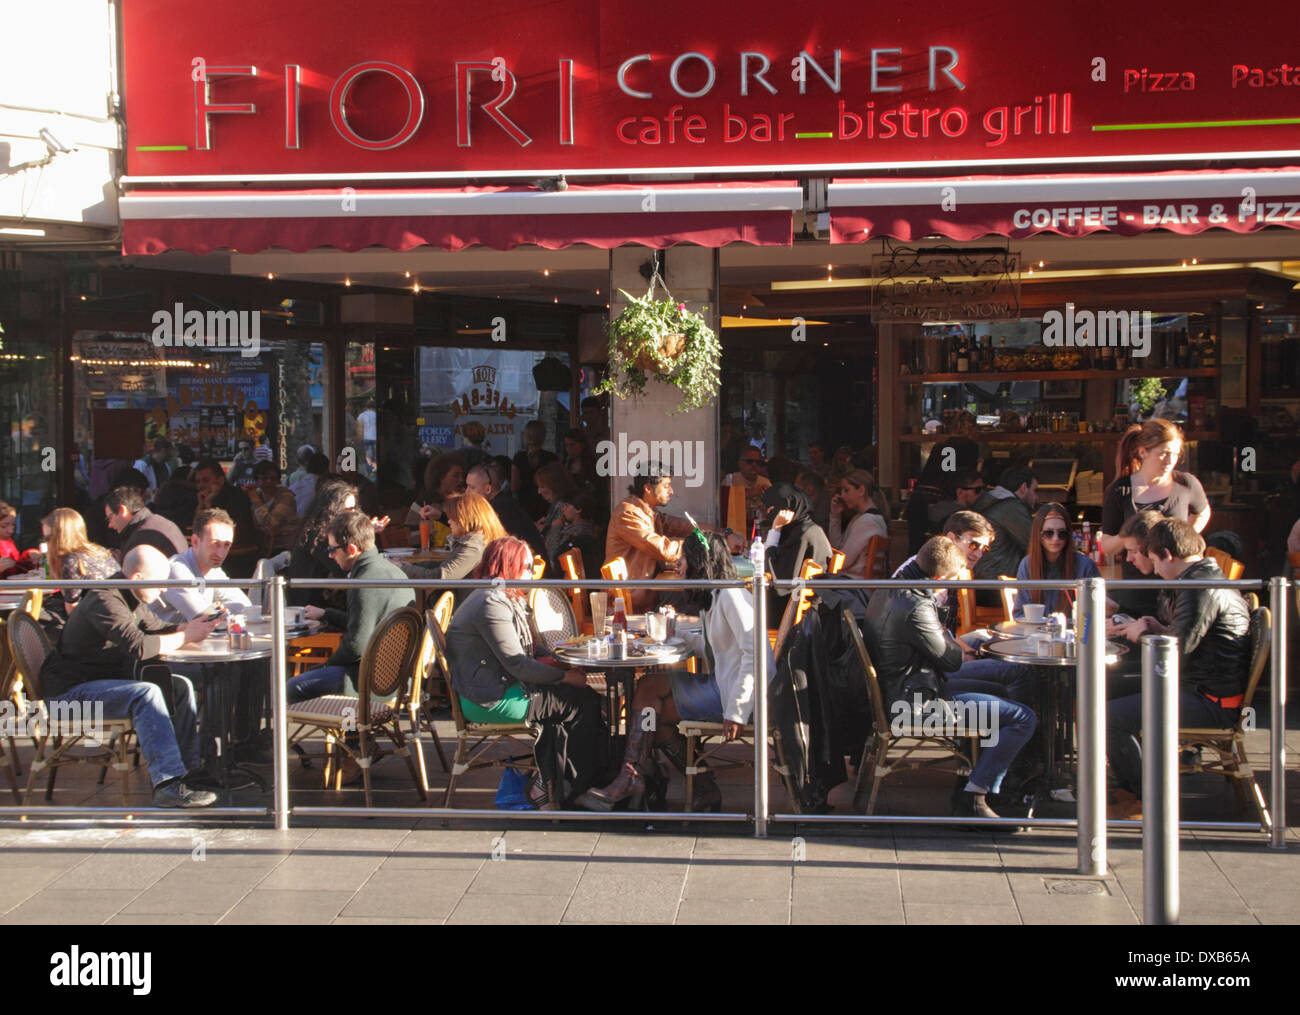 Fiori Corner Cafe Bar at Leicester Square London Spring 2014 Stock Photo